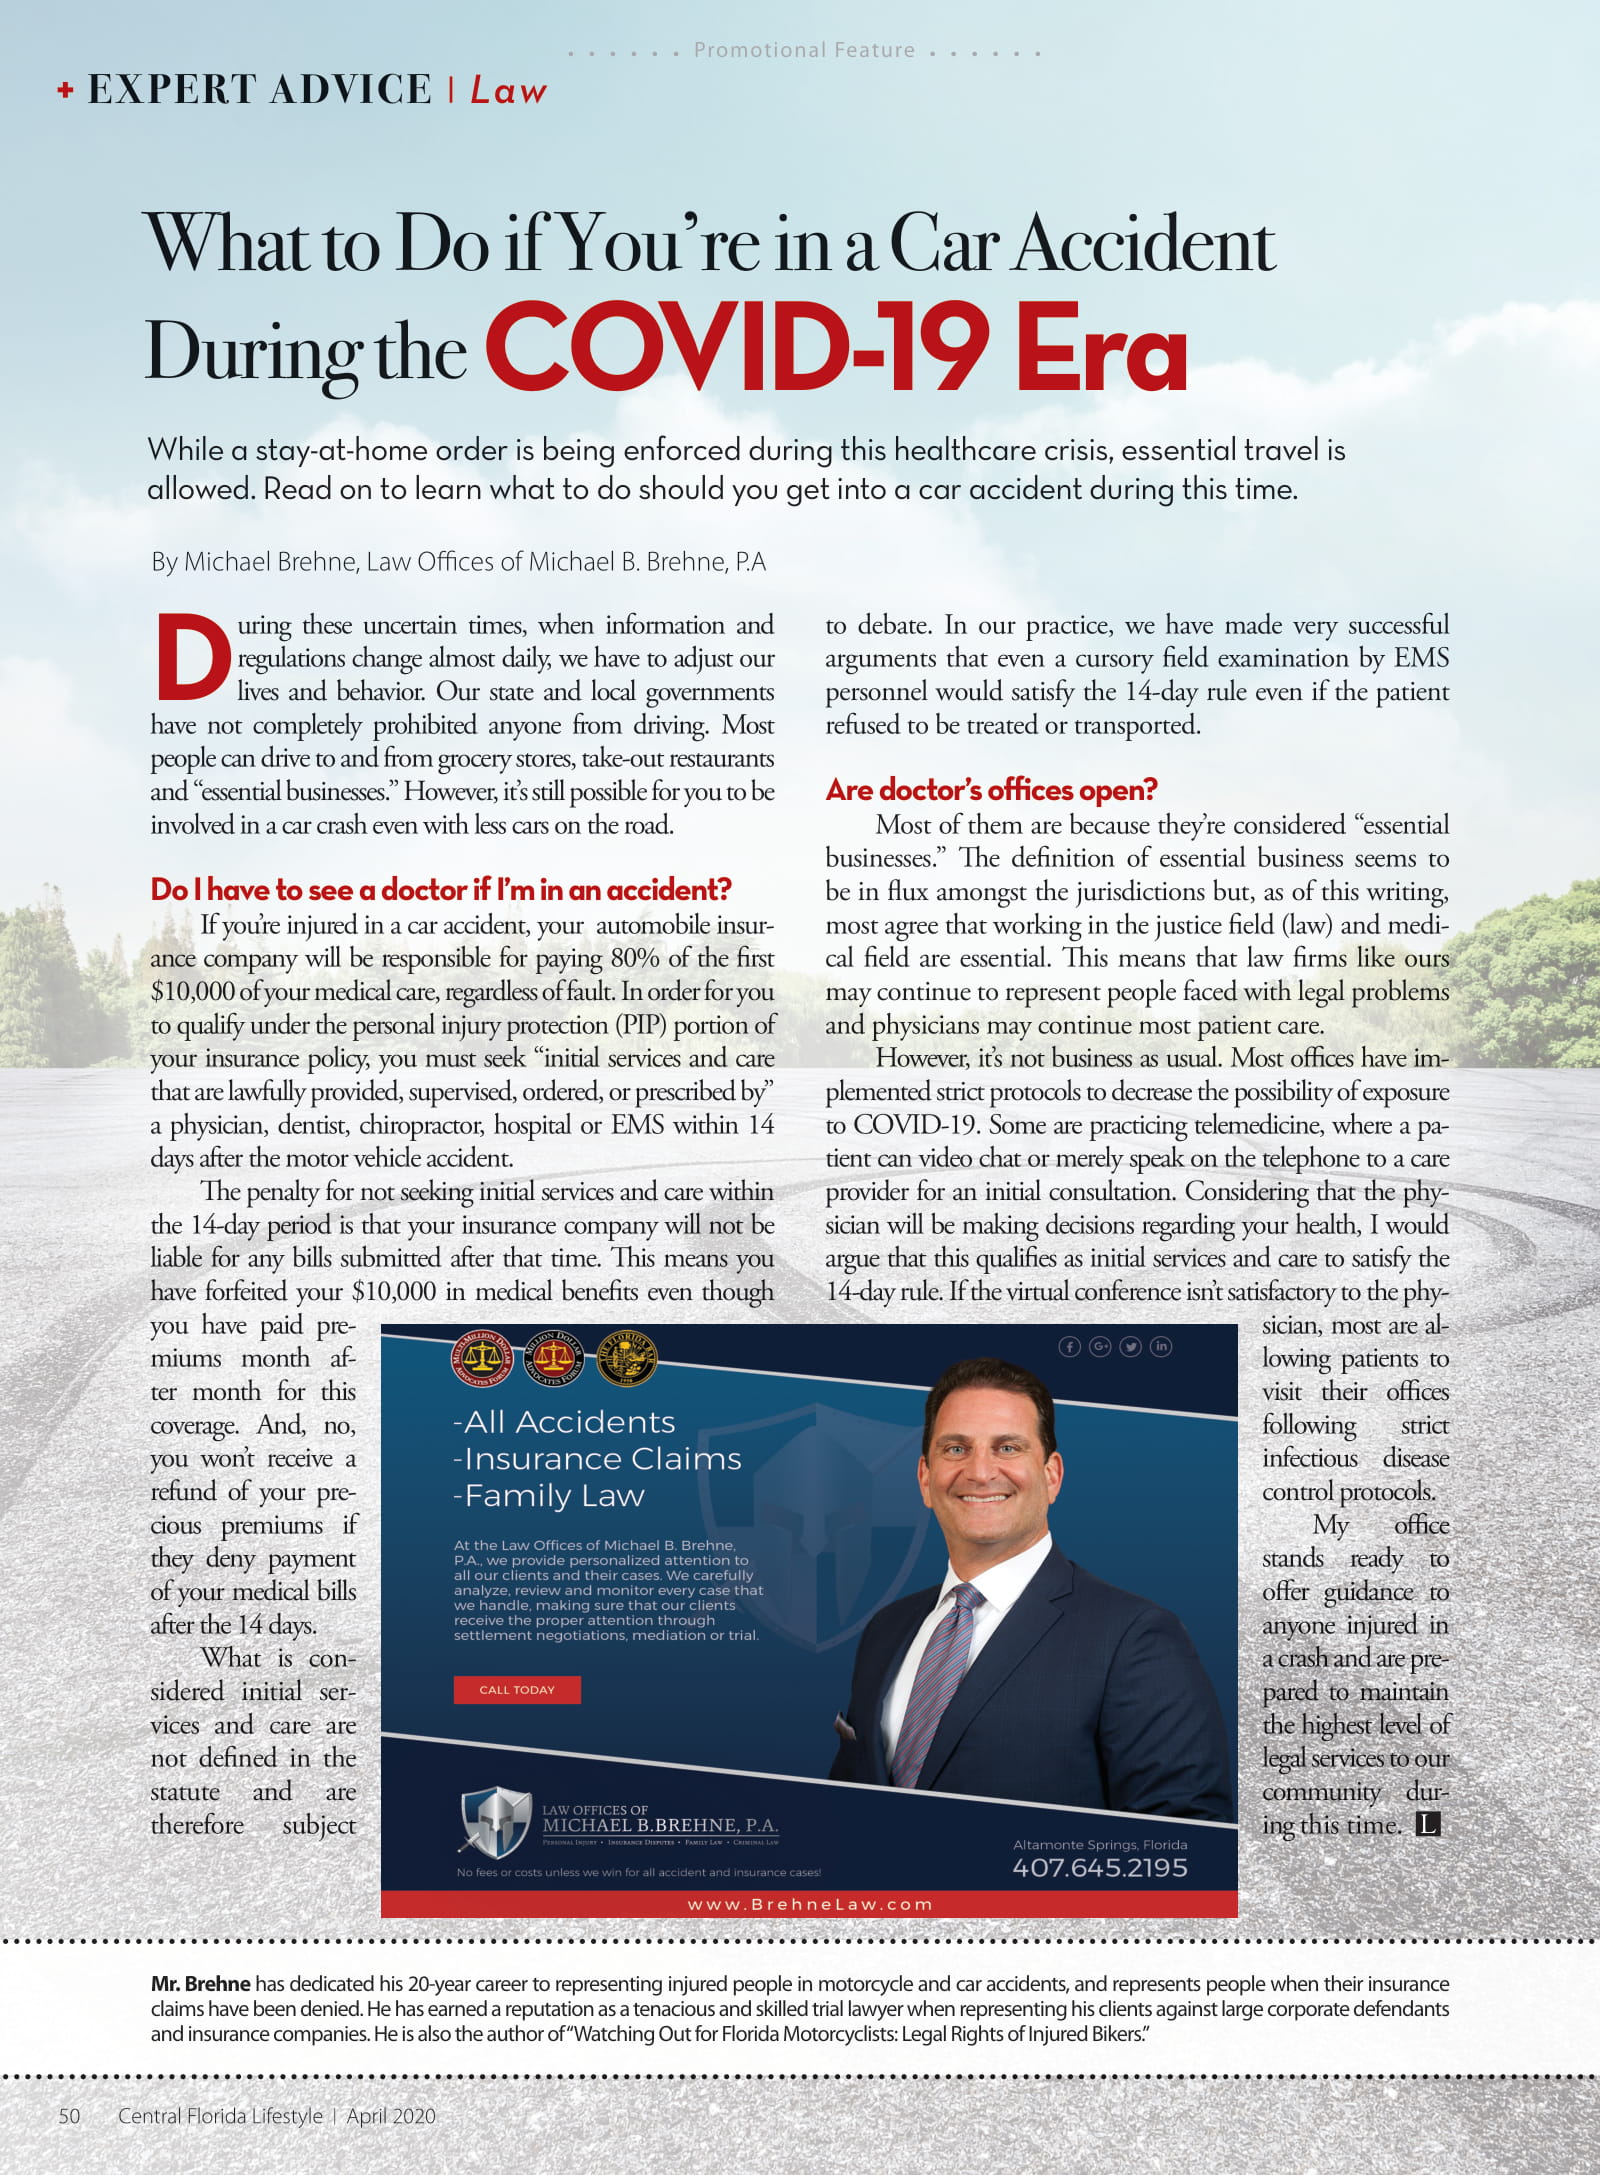 What To Do If You're In A Car Accident During The COVID-19 Era